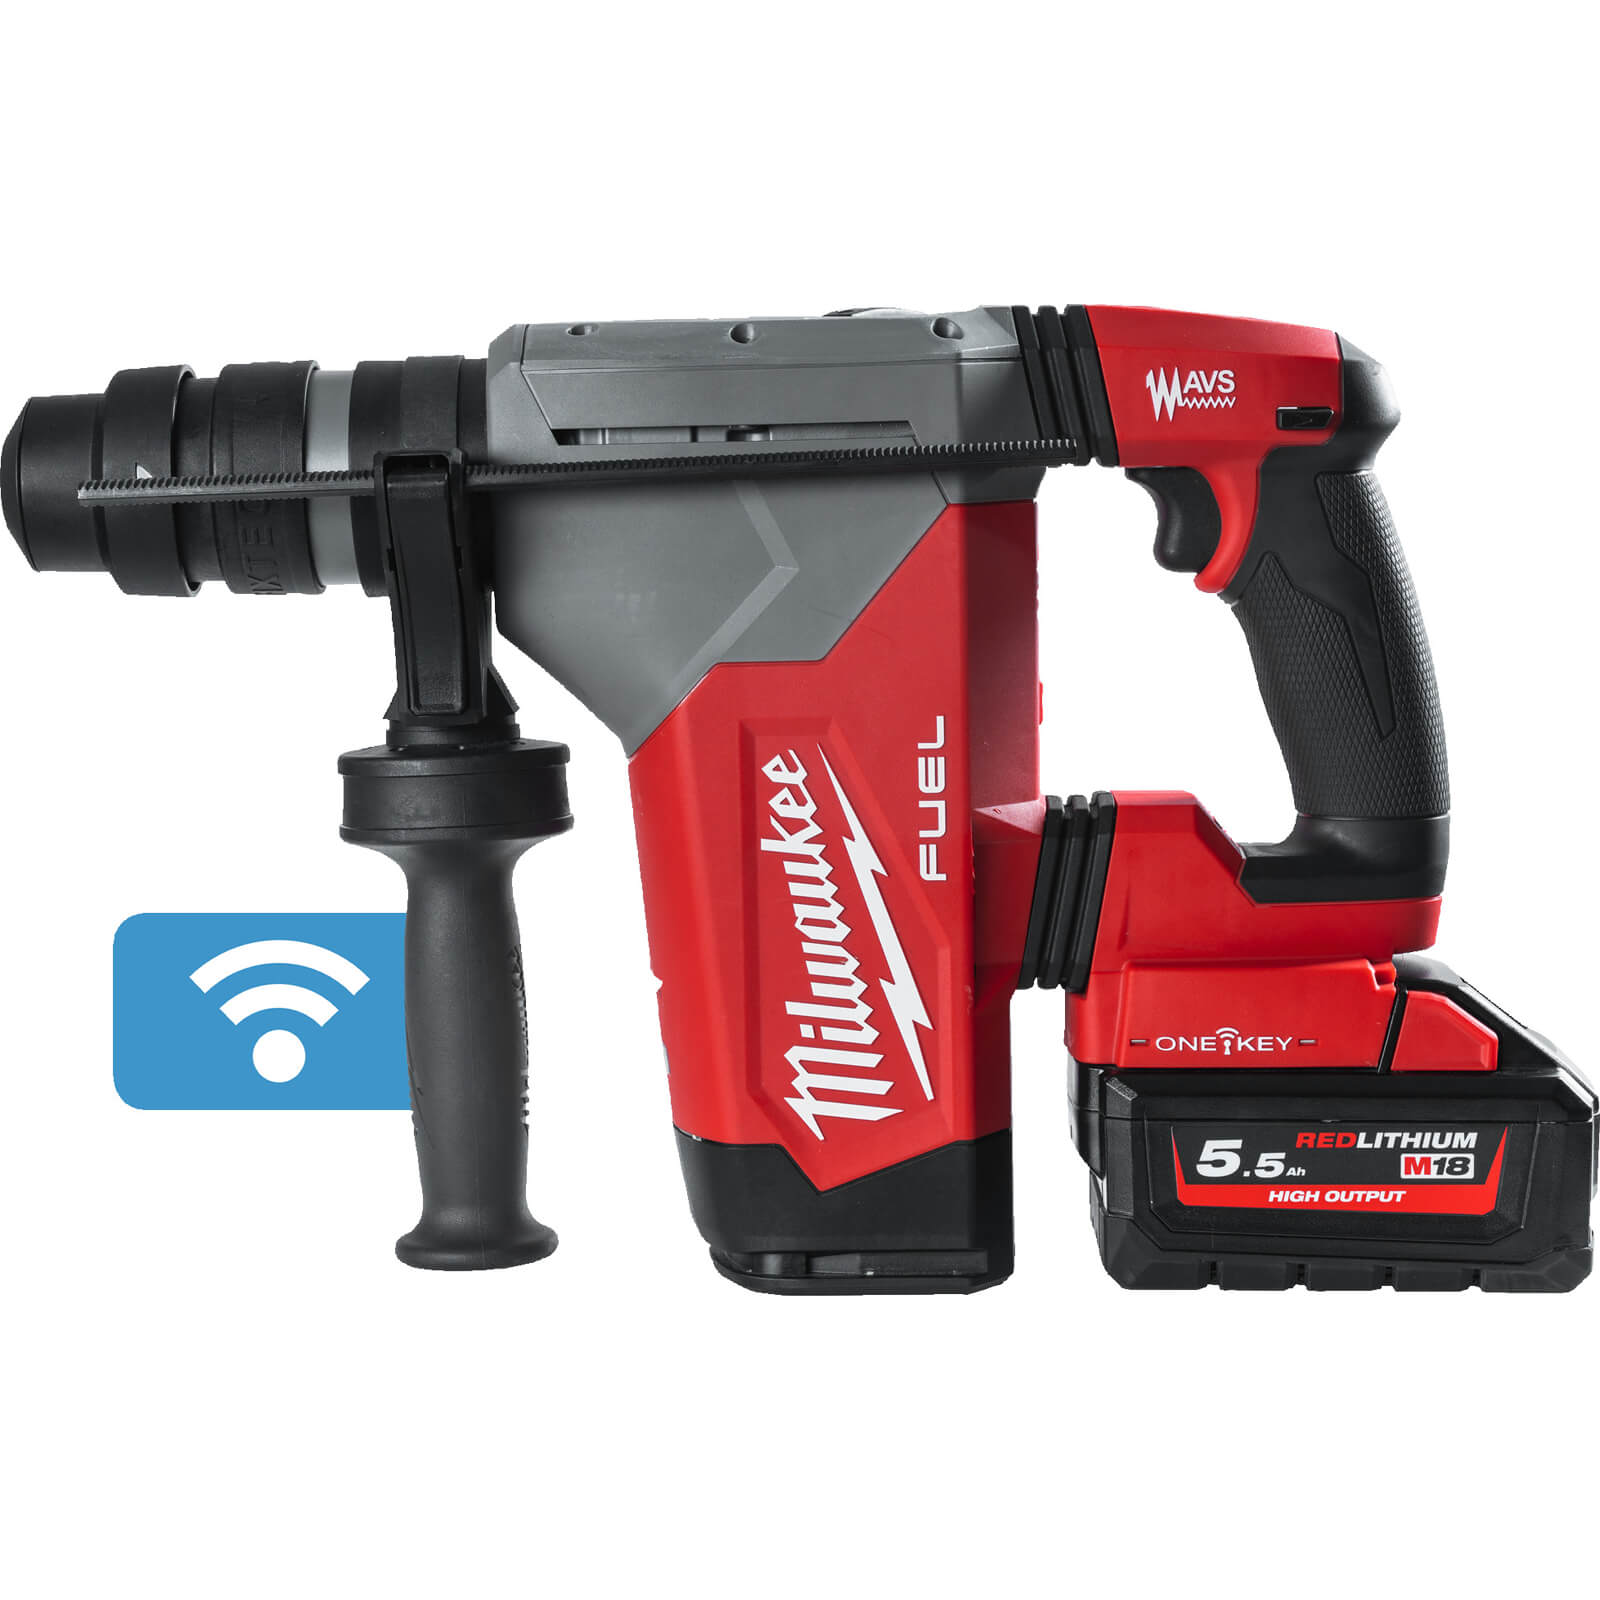 Milwaukee M18 ONEFHPX Fuel 18v Cordless Brushless SDS Plus Drill 2 x 5.5ah Li-ion Charger Case